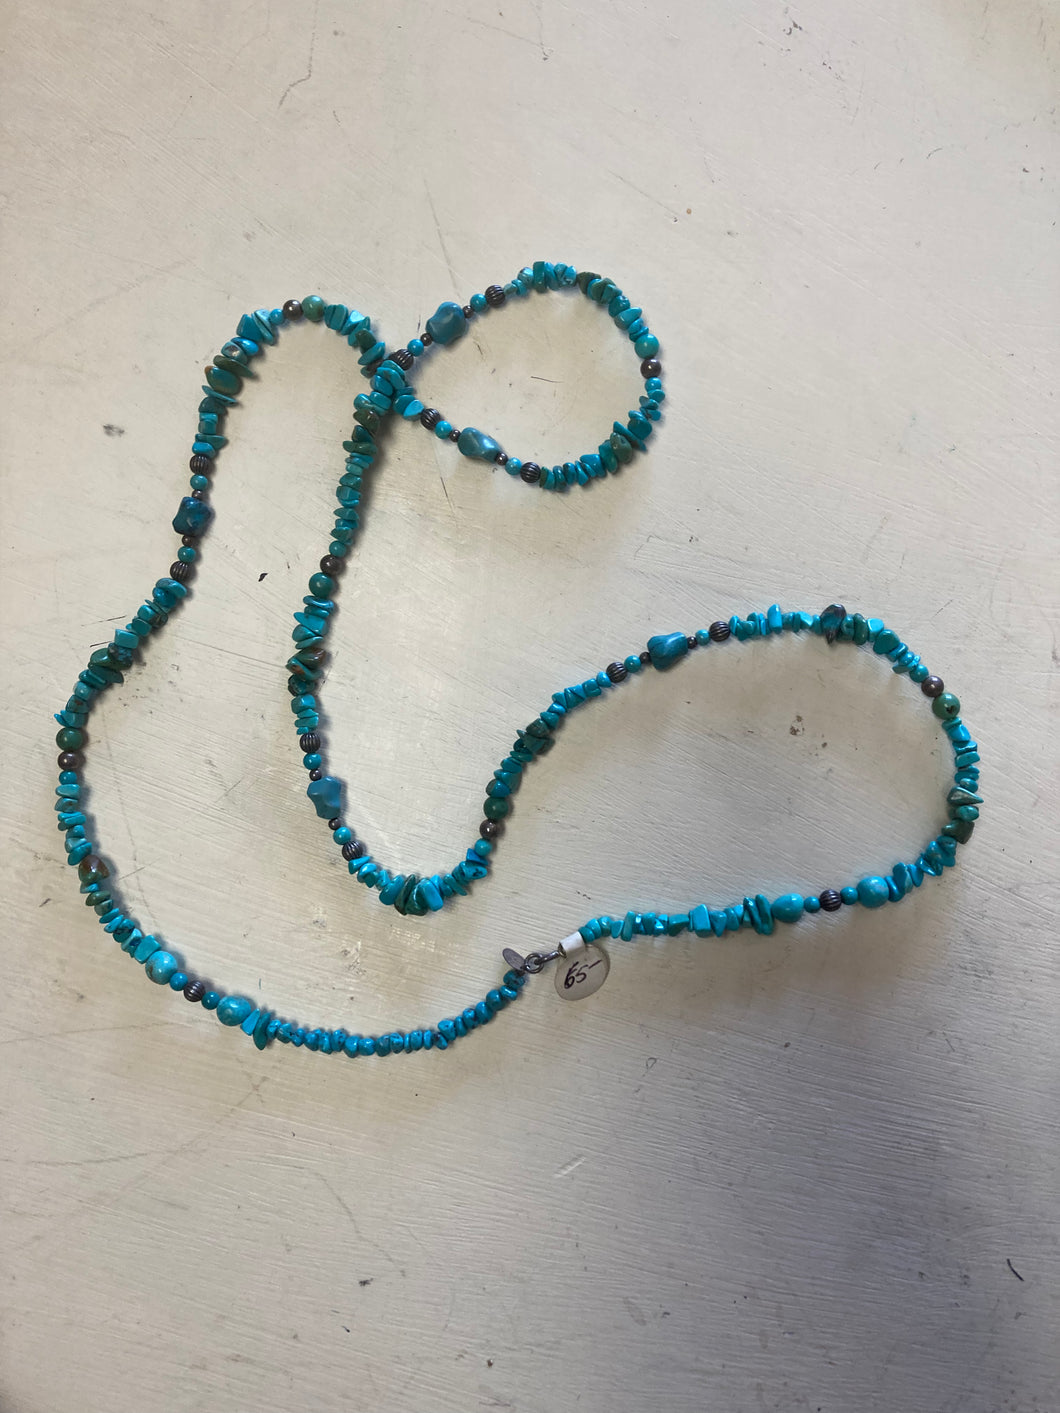 Turquoise necklace with interspersed silver ornaments